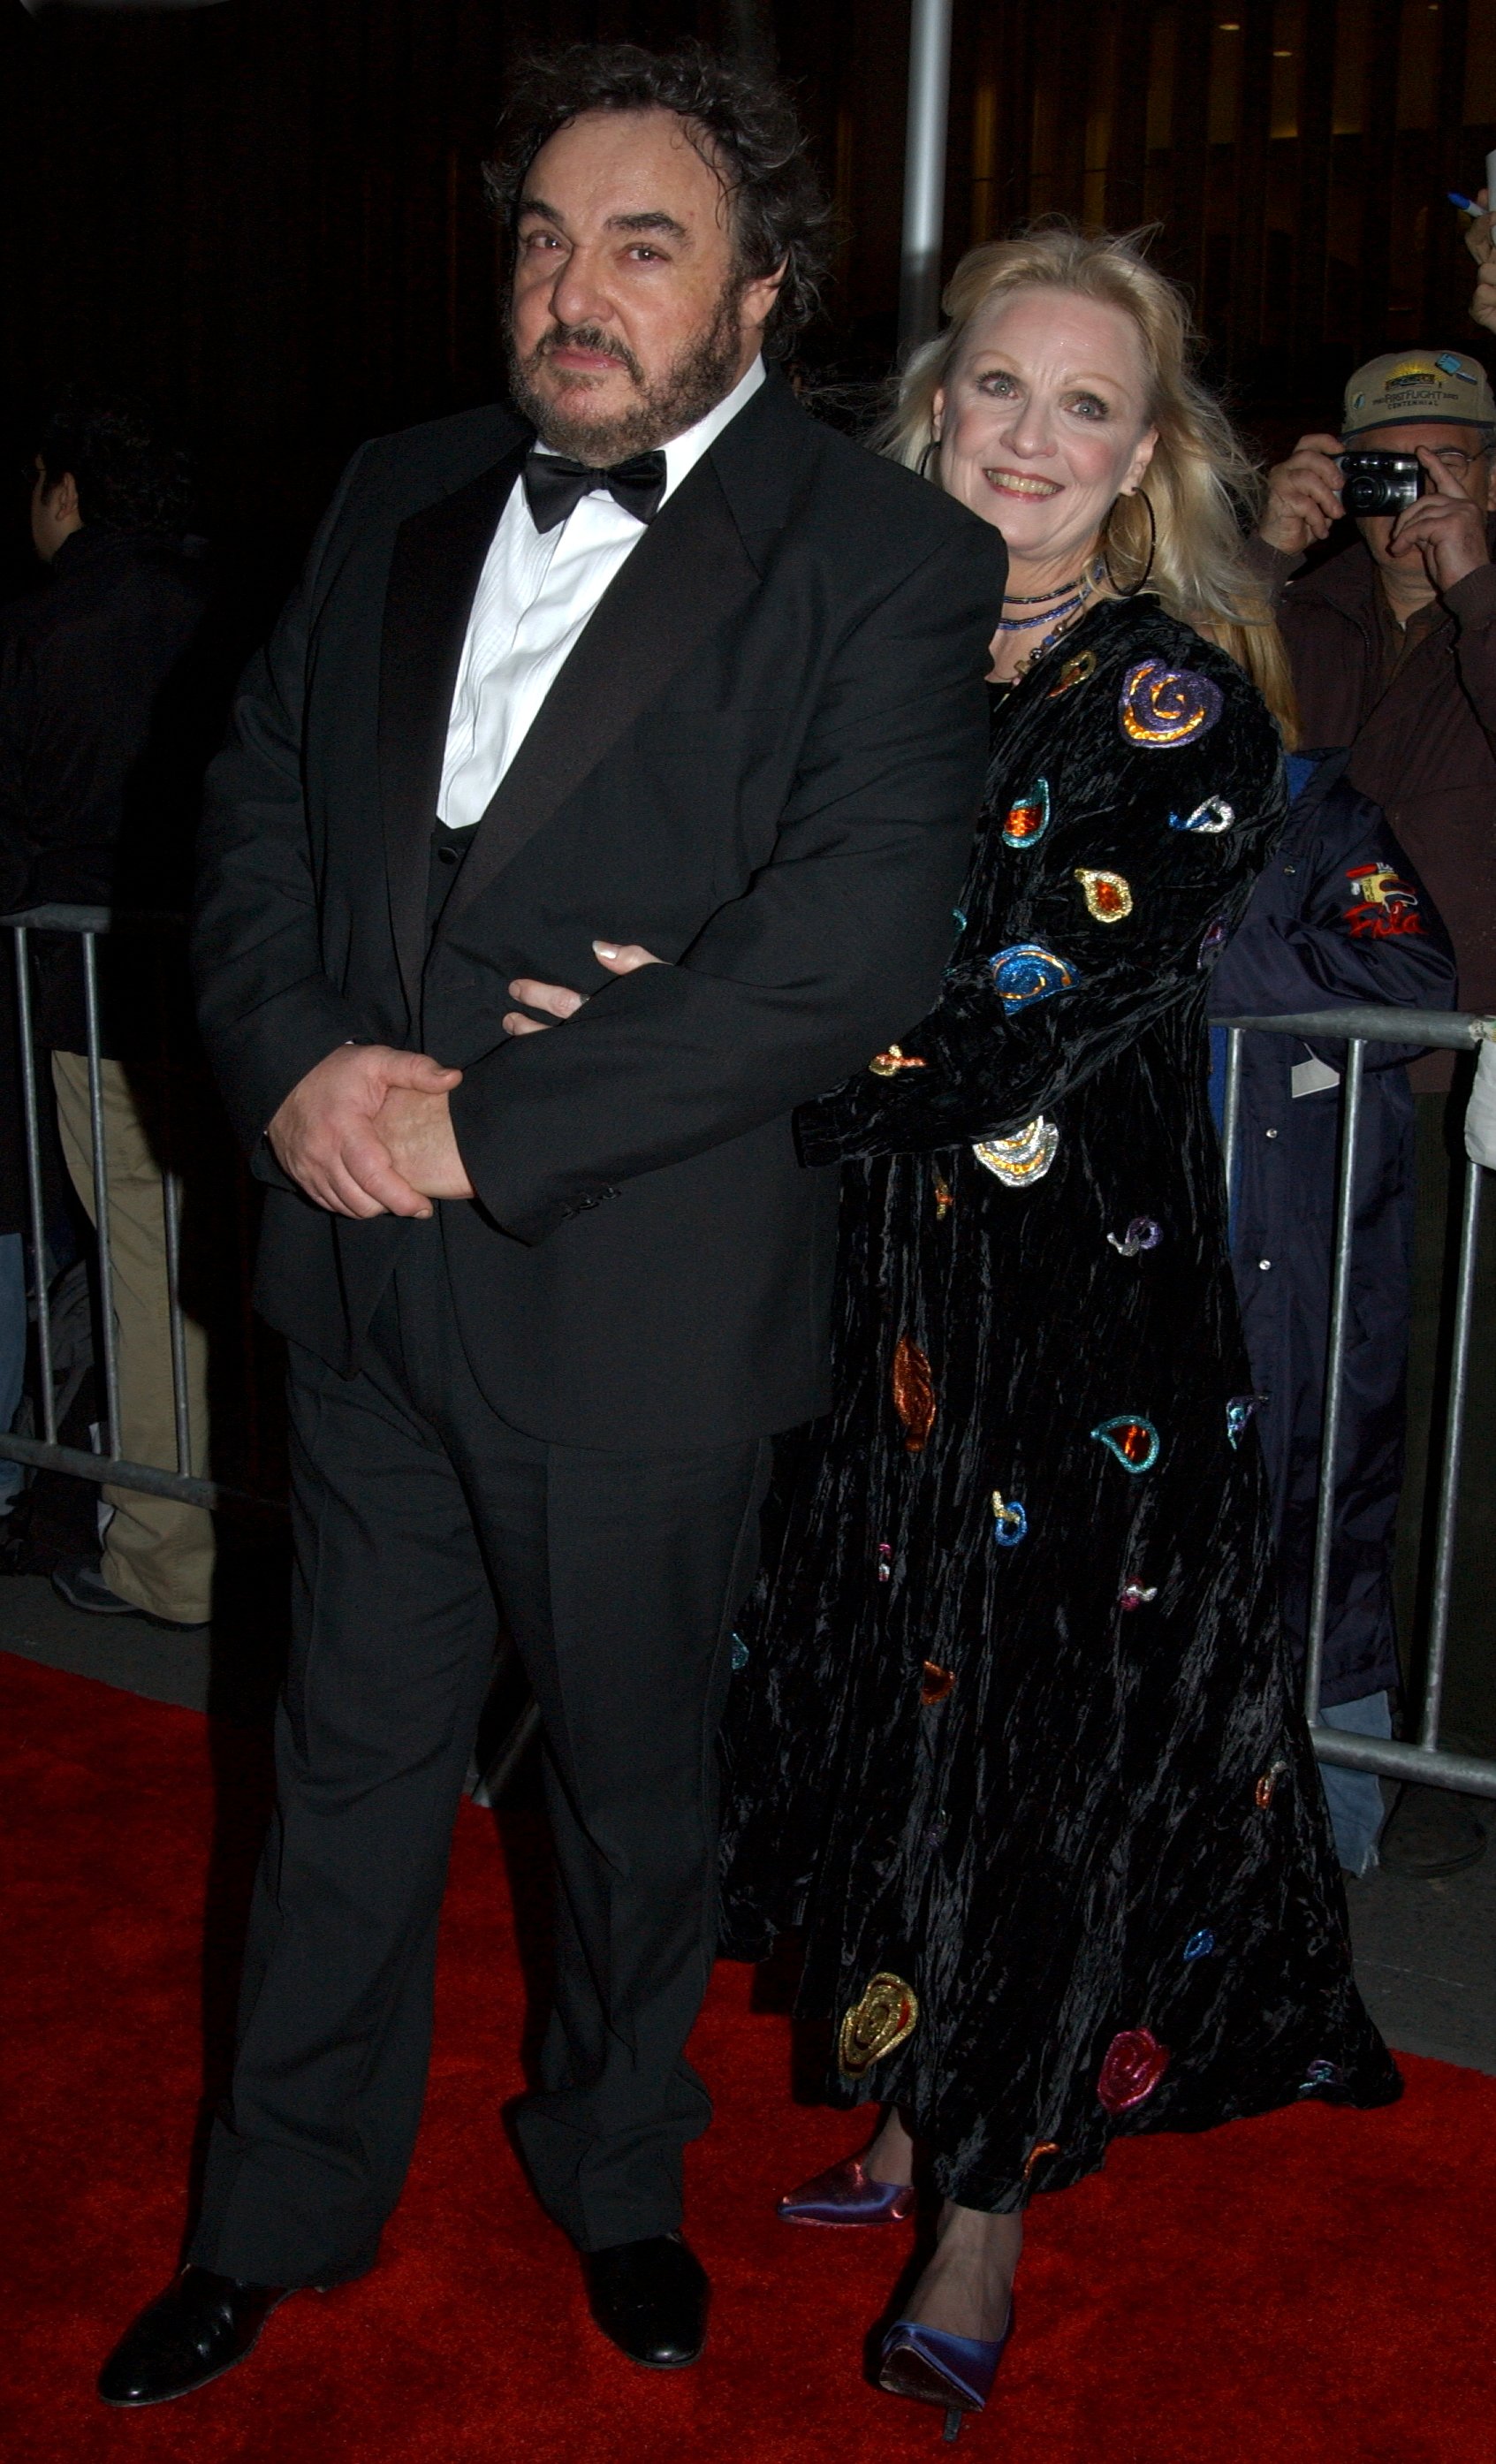 John Rhys Davies with Suzanne in New York, United States on December 13, 2001 | Source: Getty Images